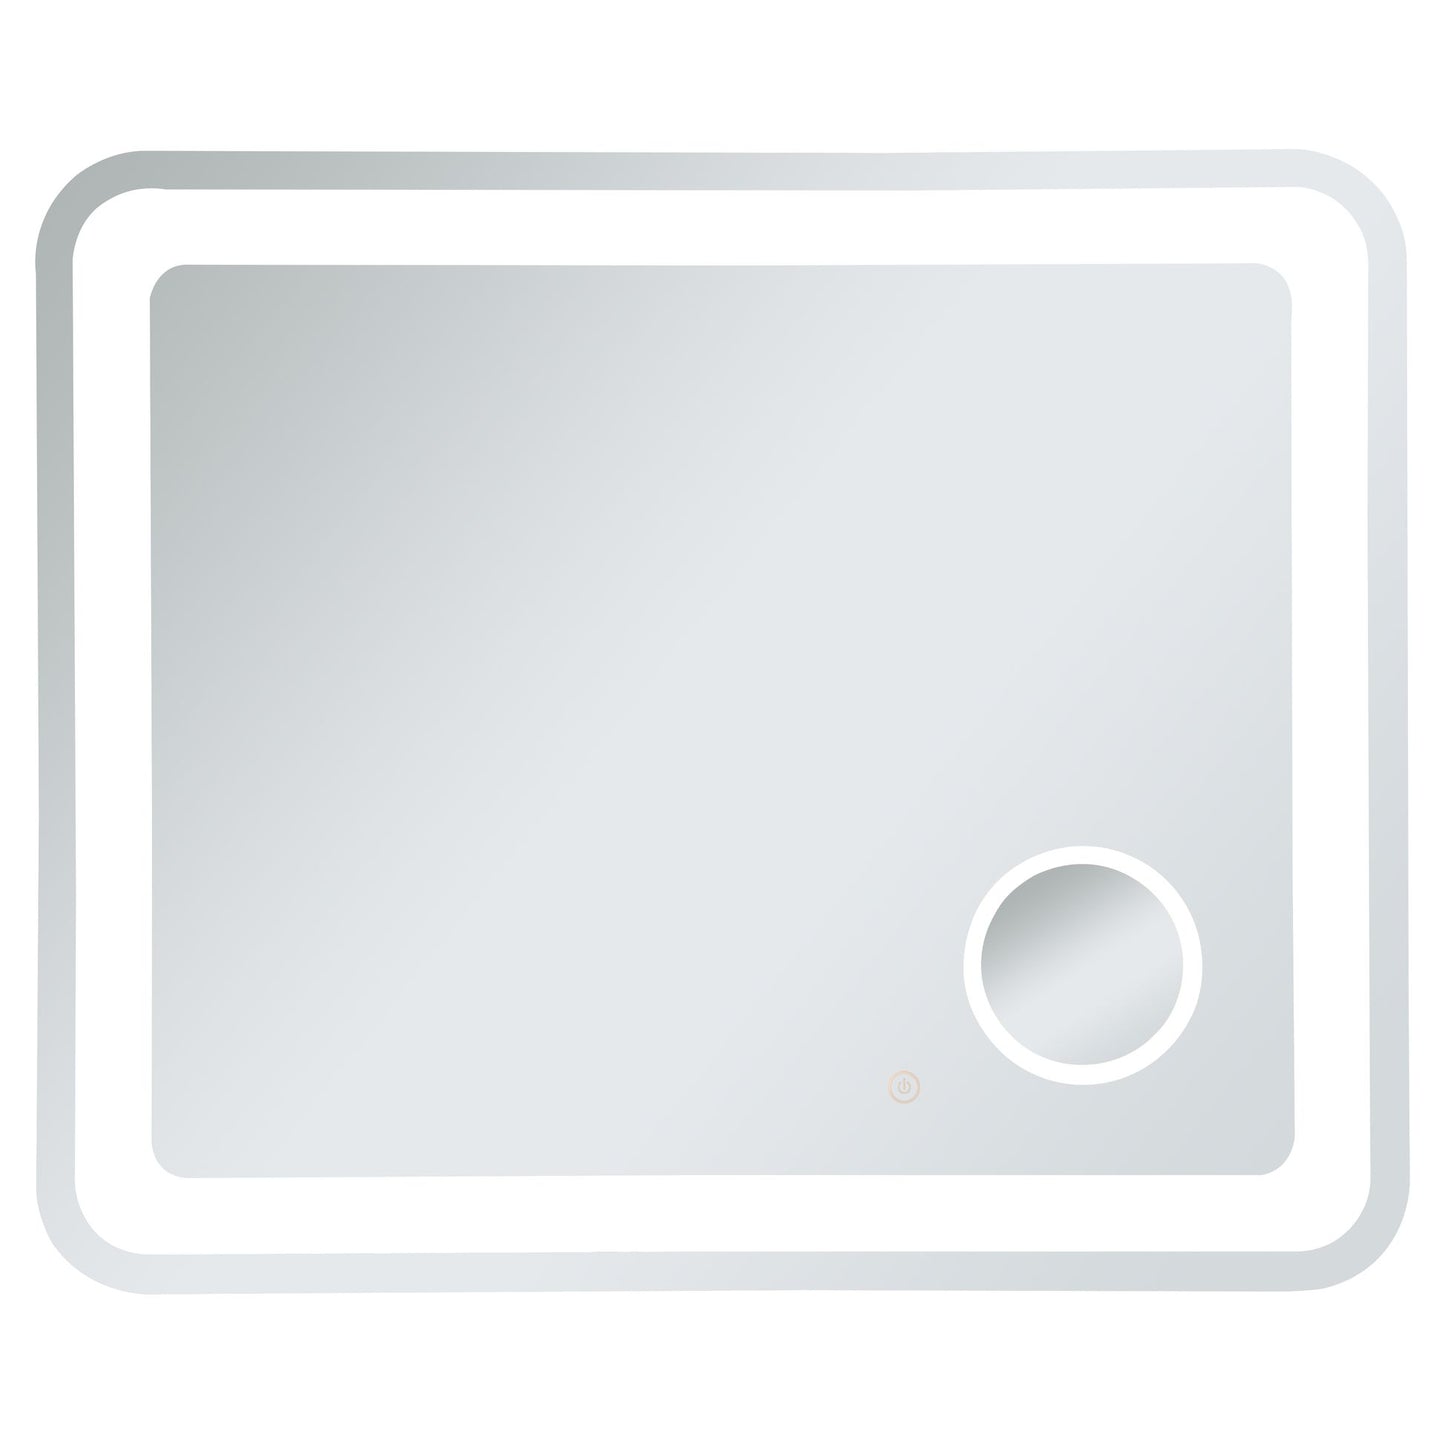 MRE53036 Lux 36" x 30" LED Mirror in Glossy White - Adjustable Color Temp